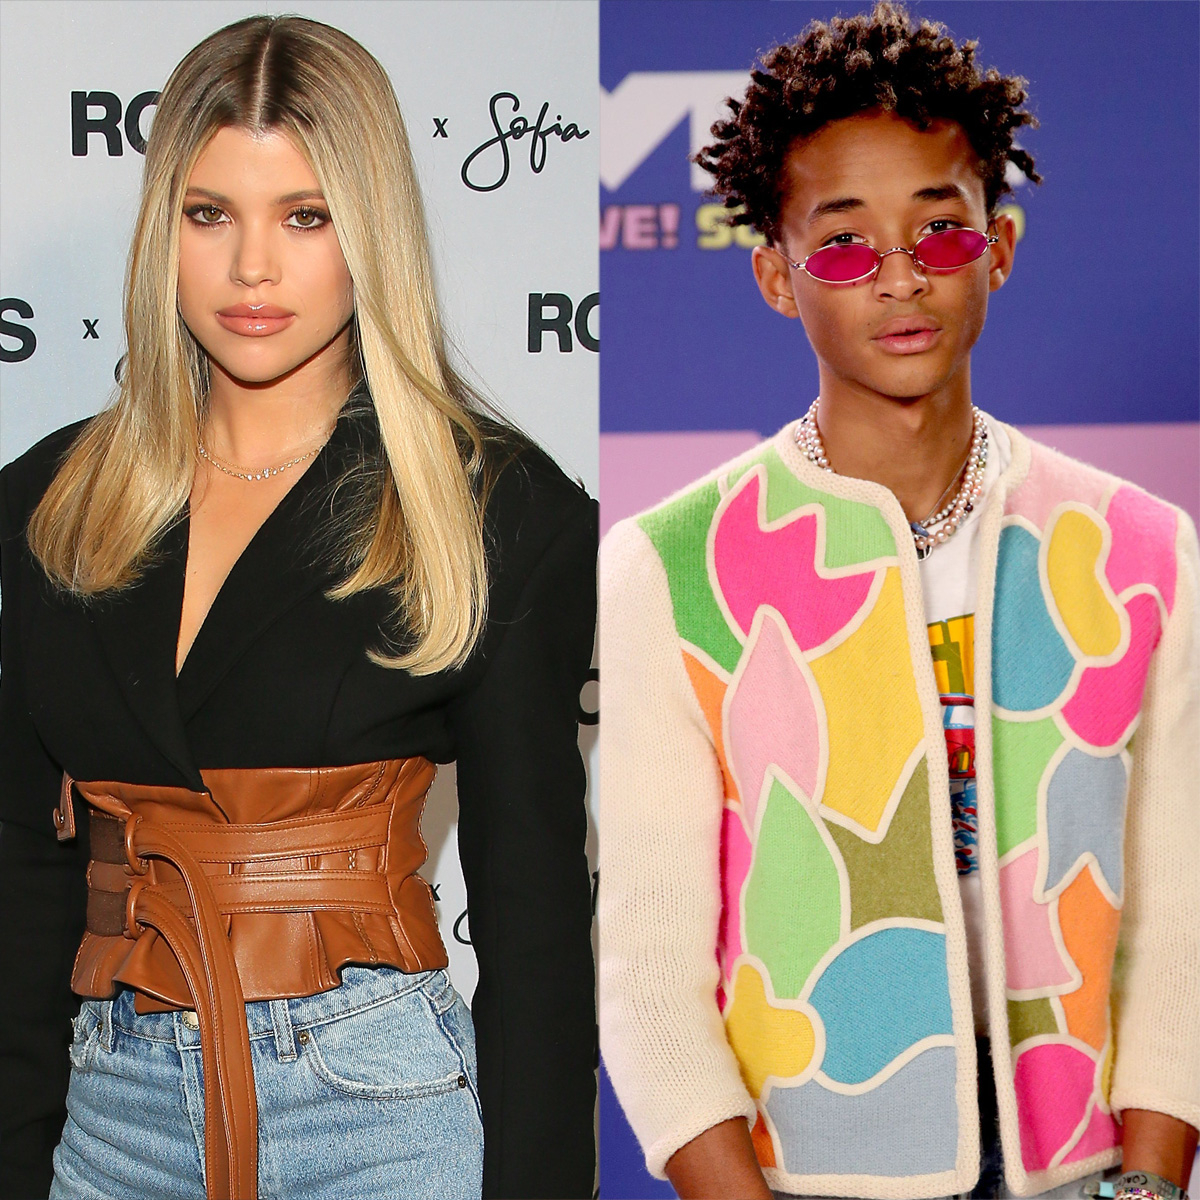 Sofia Richie and I are 'just homies': Jaden Smith after beach outing